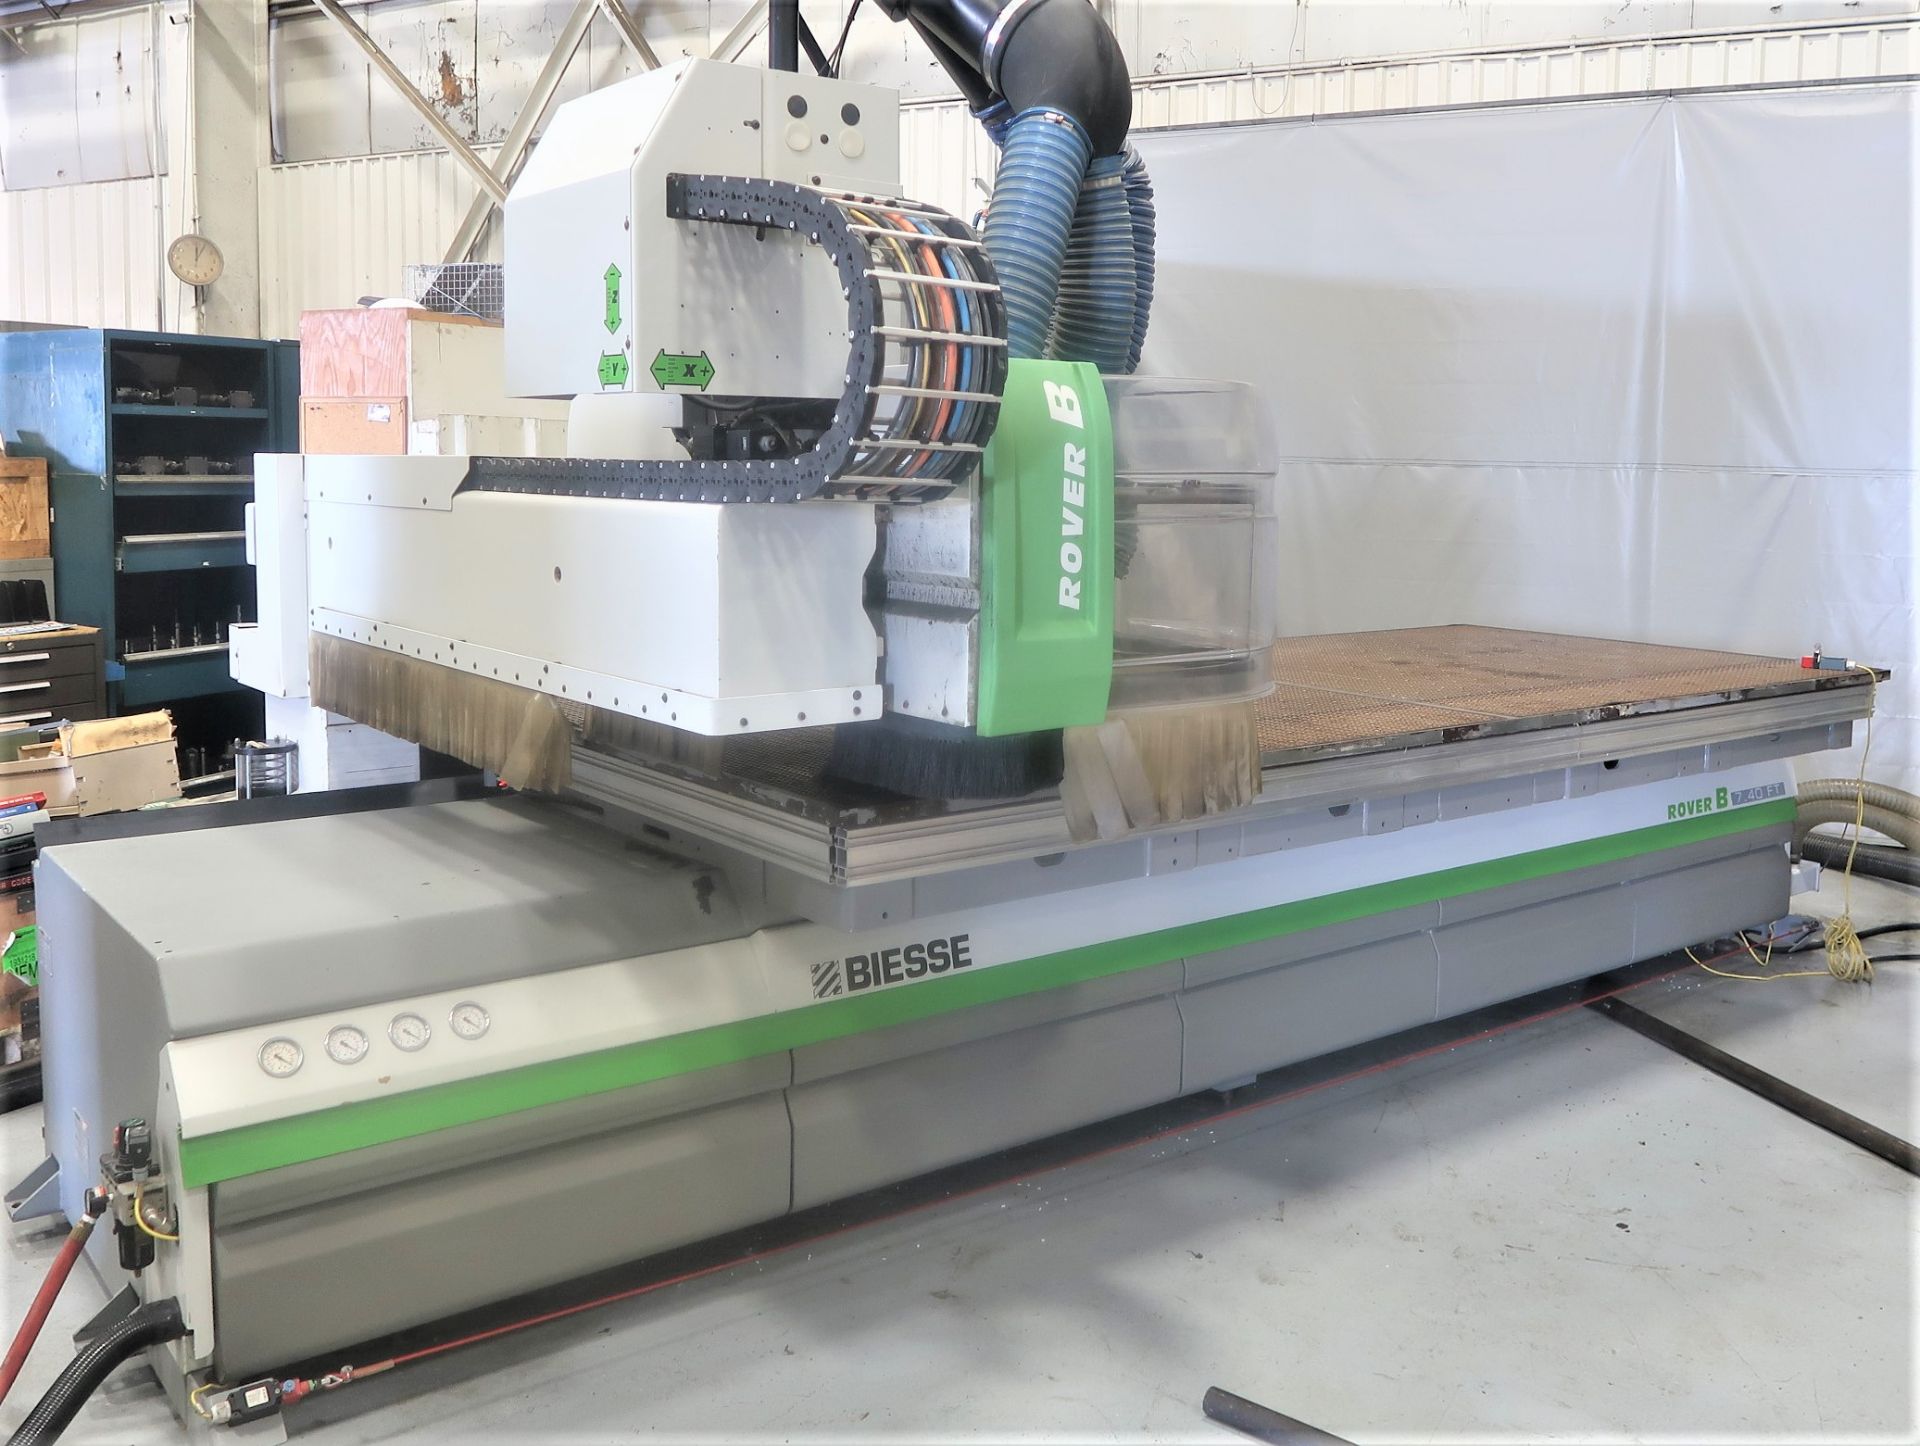 5'x12' Biesse Rover B 7.40 ft CNC 3-Axis Router with Boring Unit & Aggregate Saw, S/N 64574